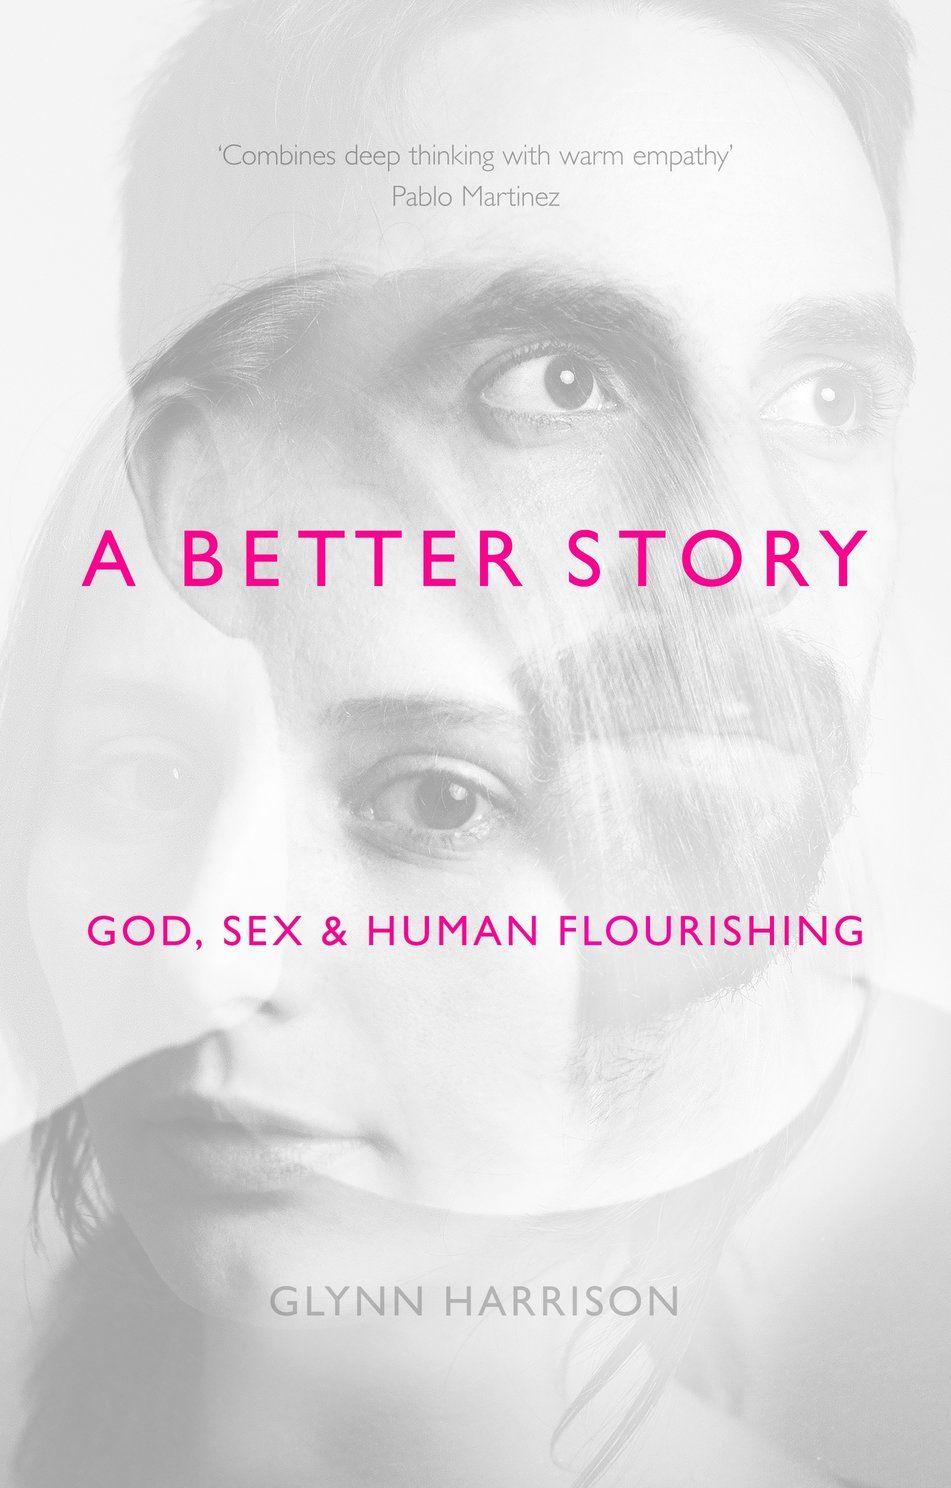 A Better Story: God, Sex and Human Flourishing by Glynn Harrison – A Review